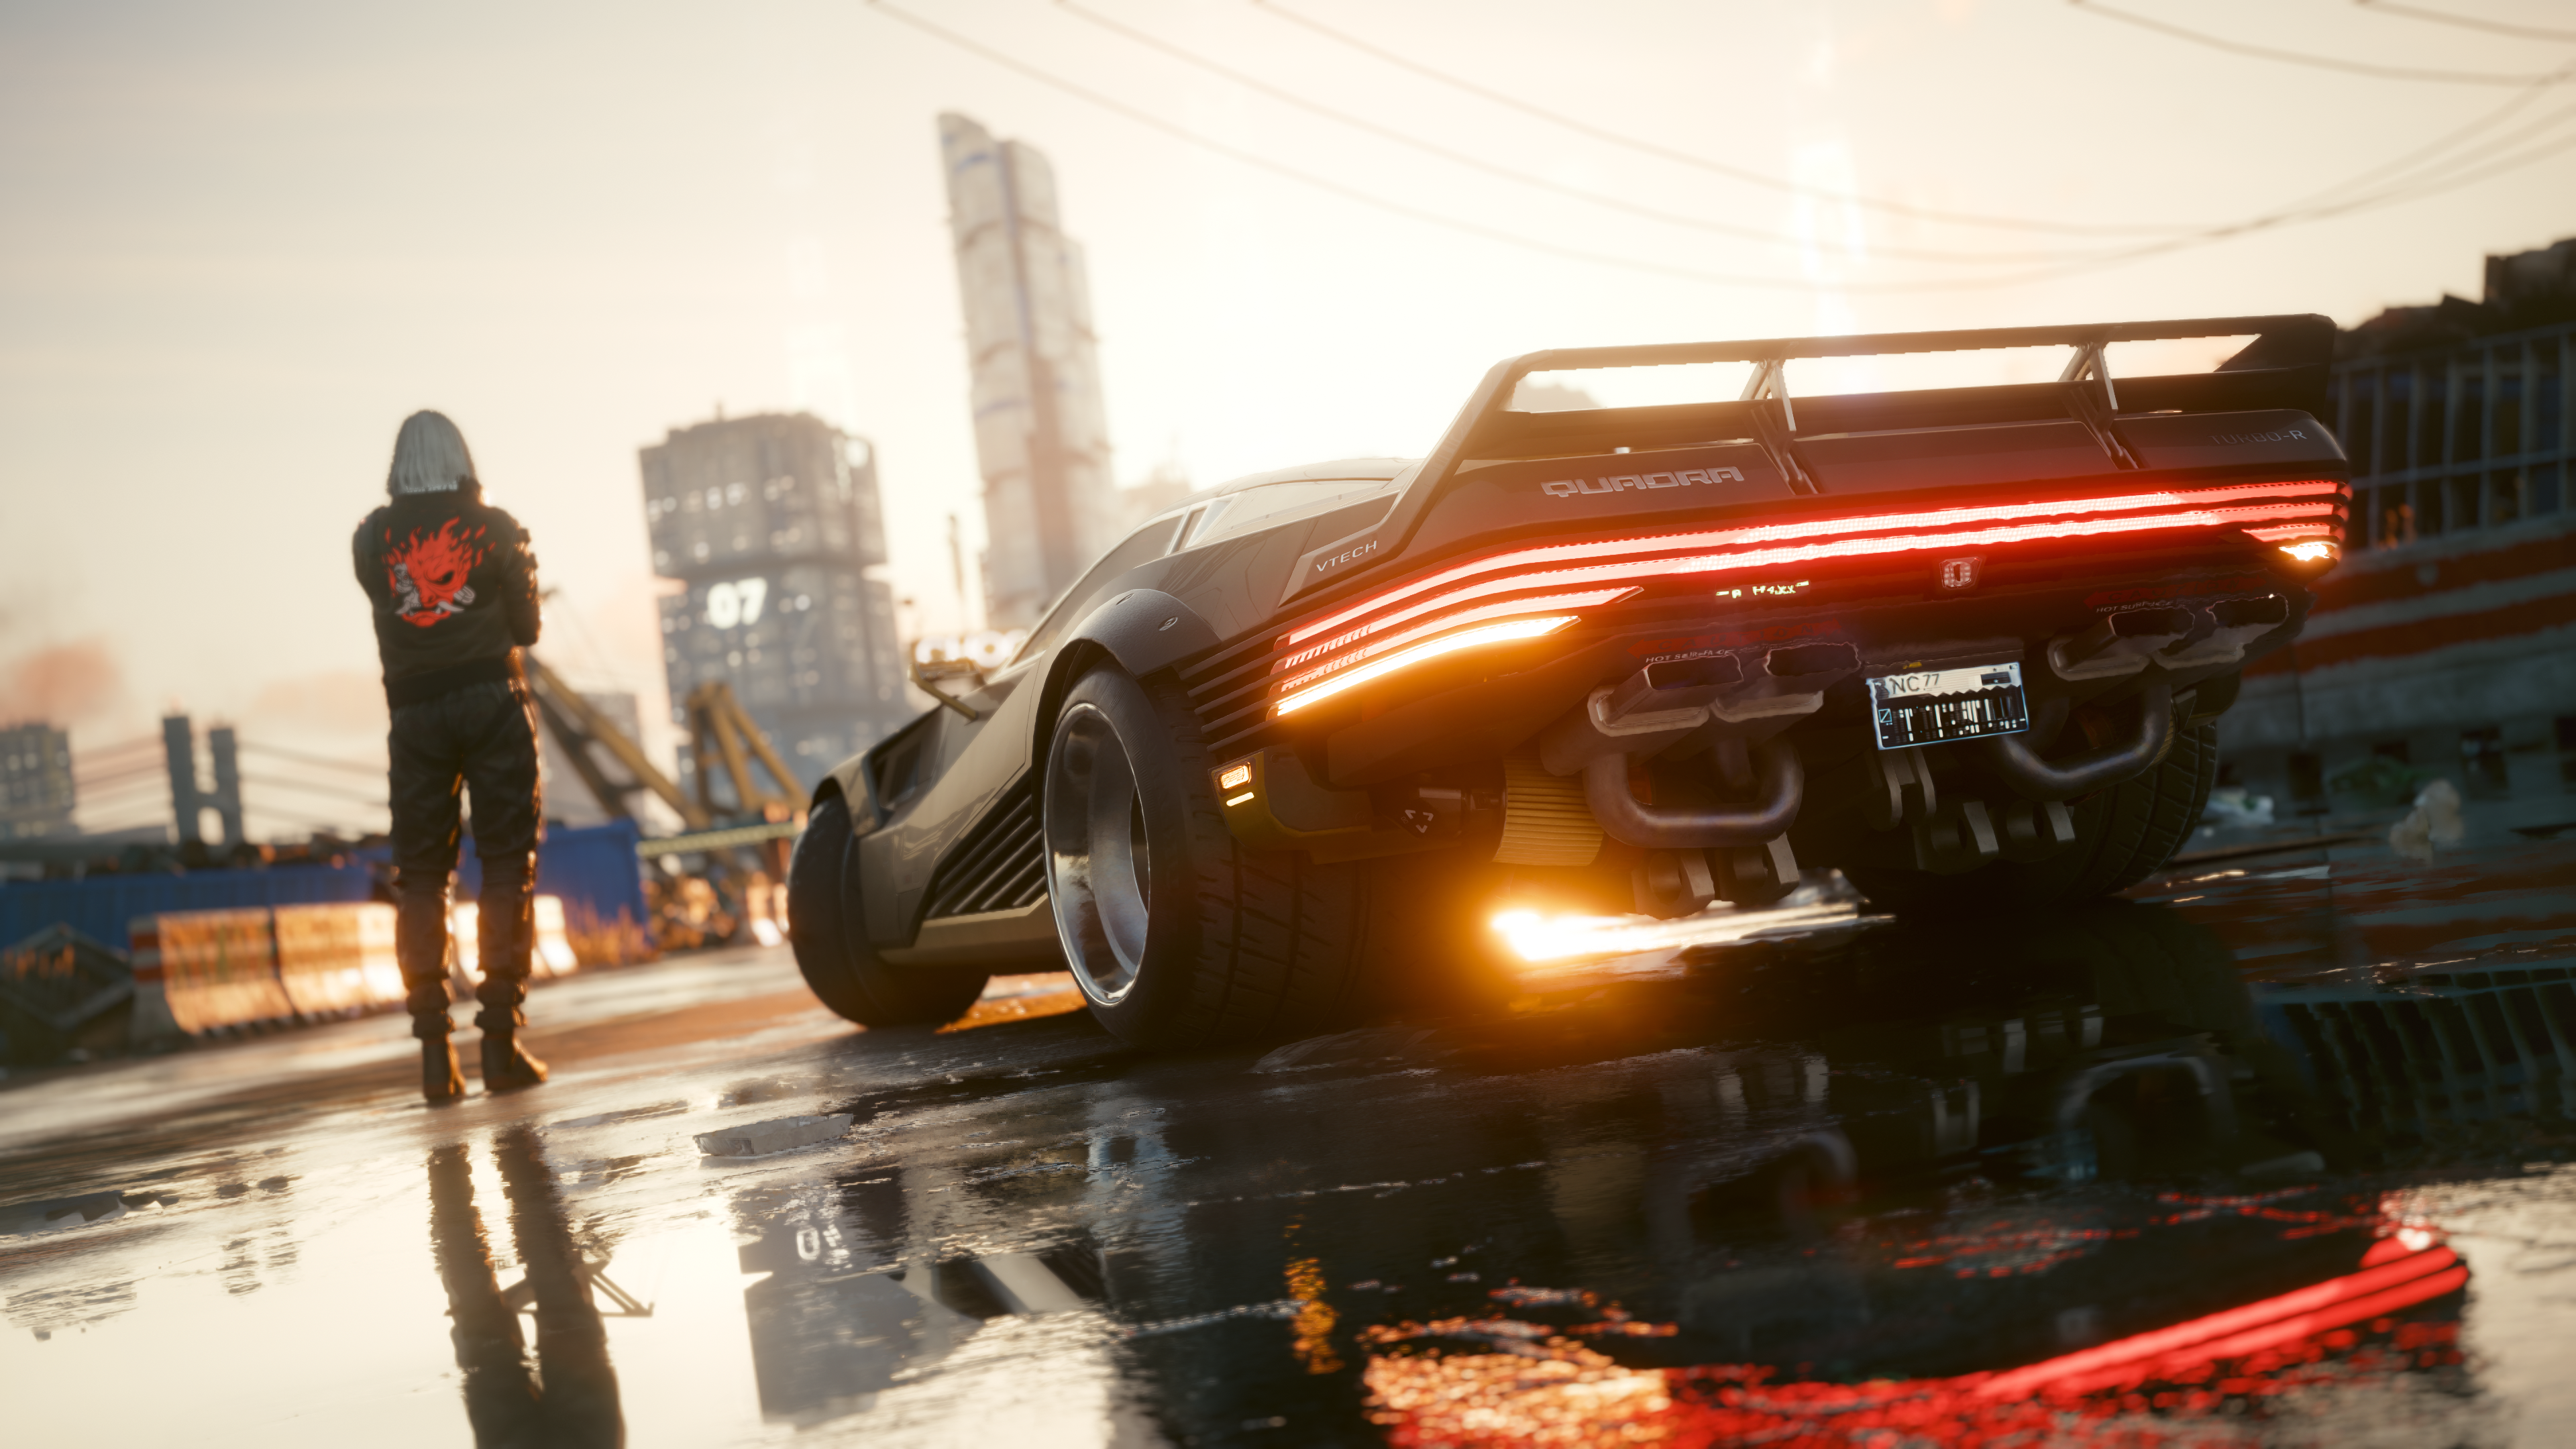 Cyberpunk 2077: Incredible Screenshots With Ray Tracing: Overdrive Mode, GeForce News